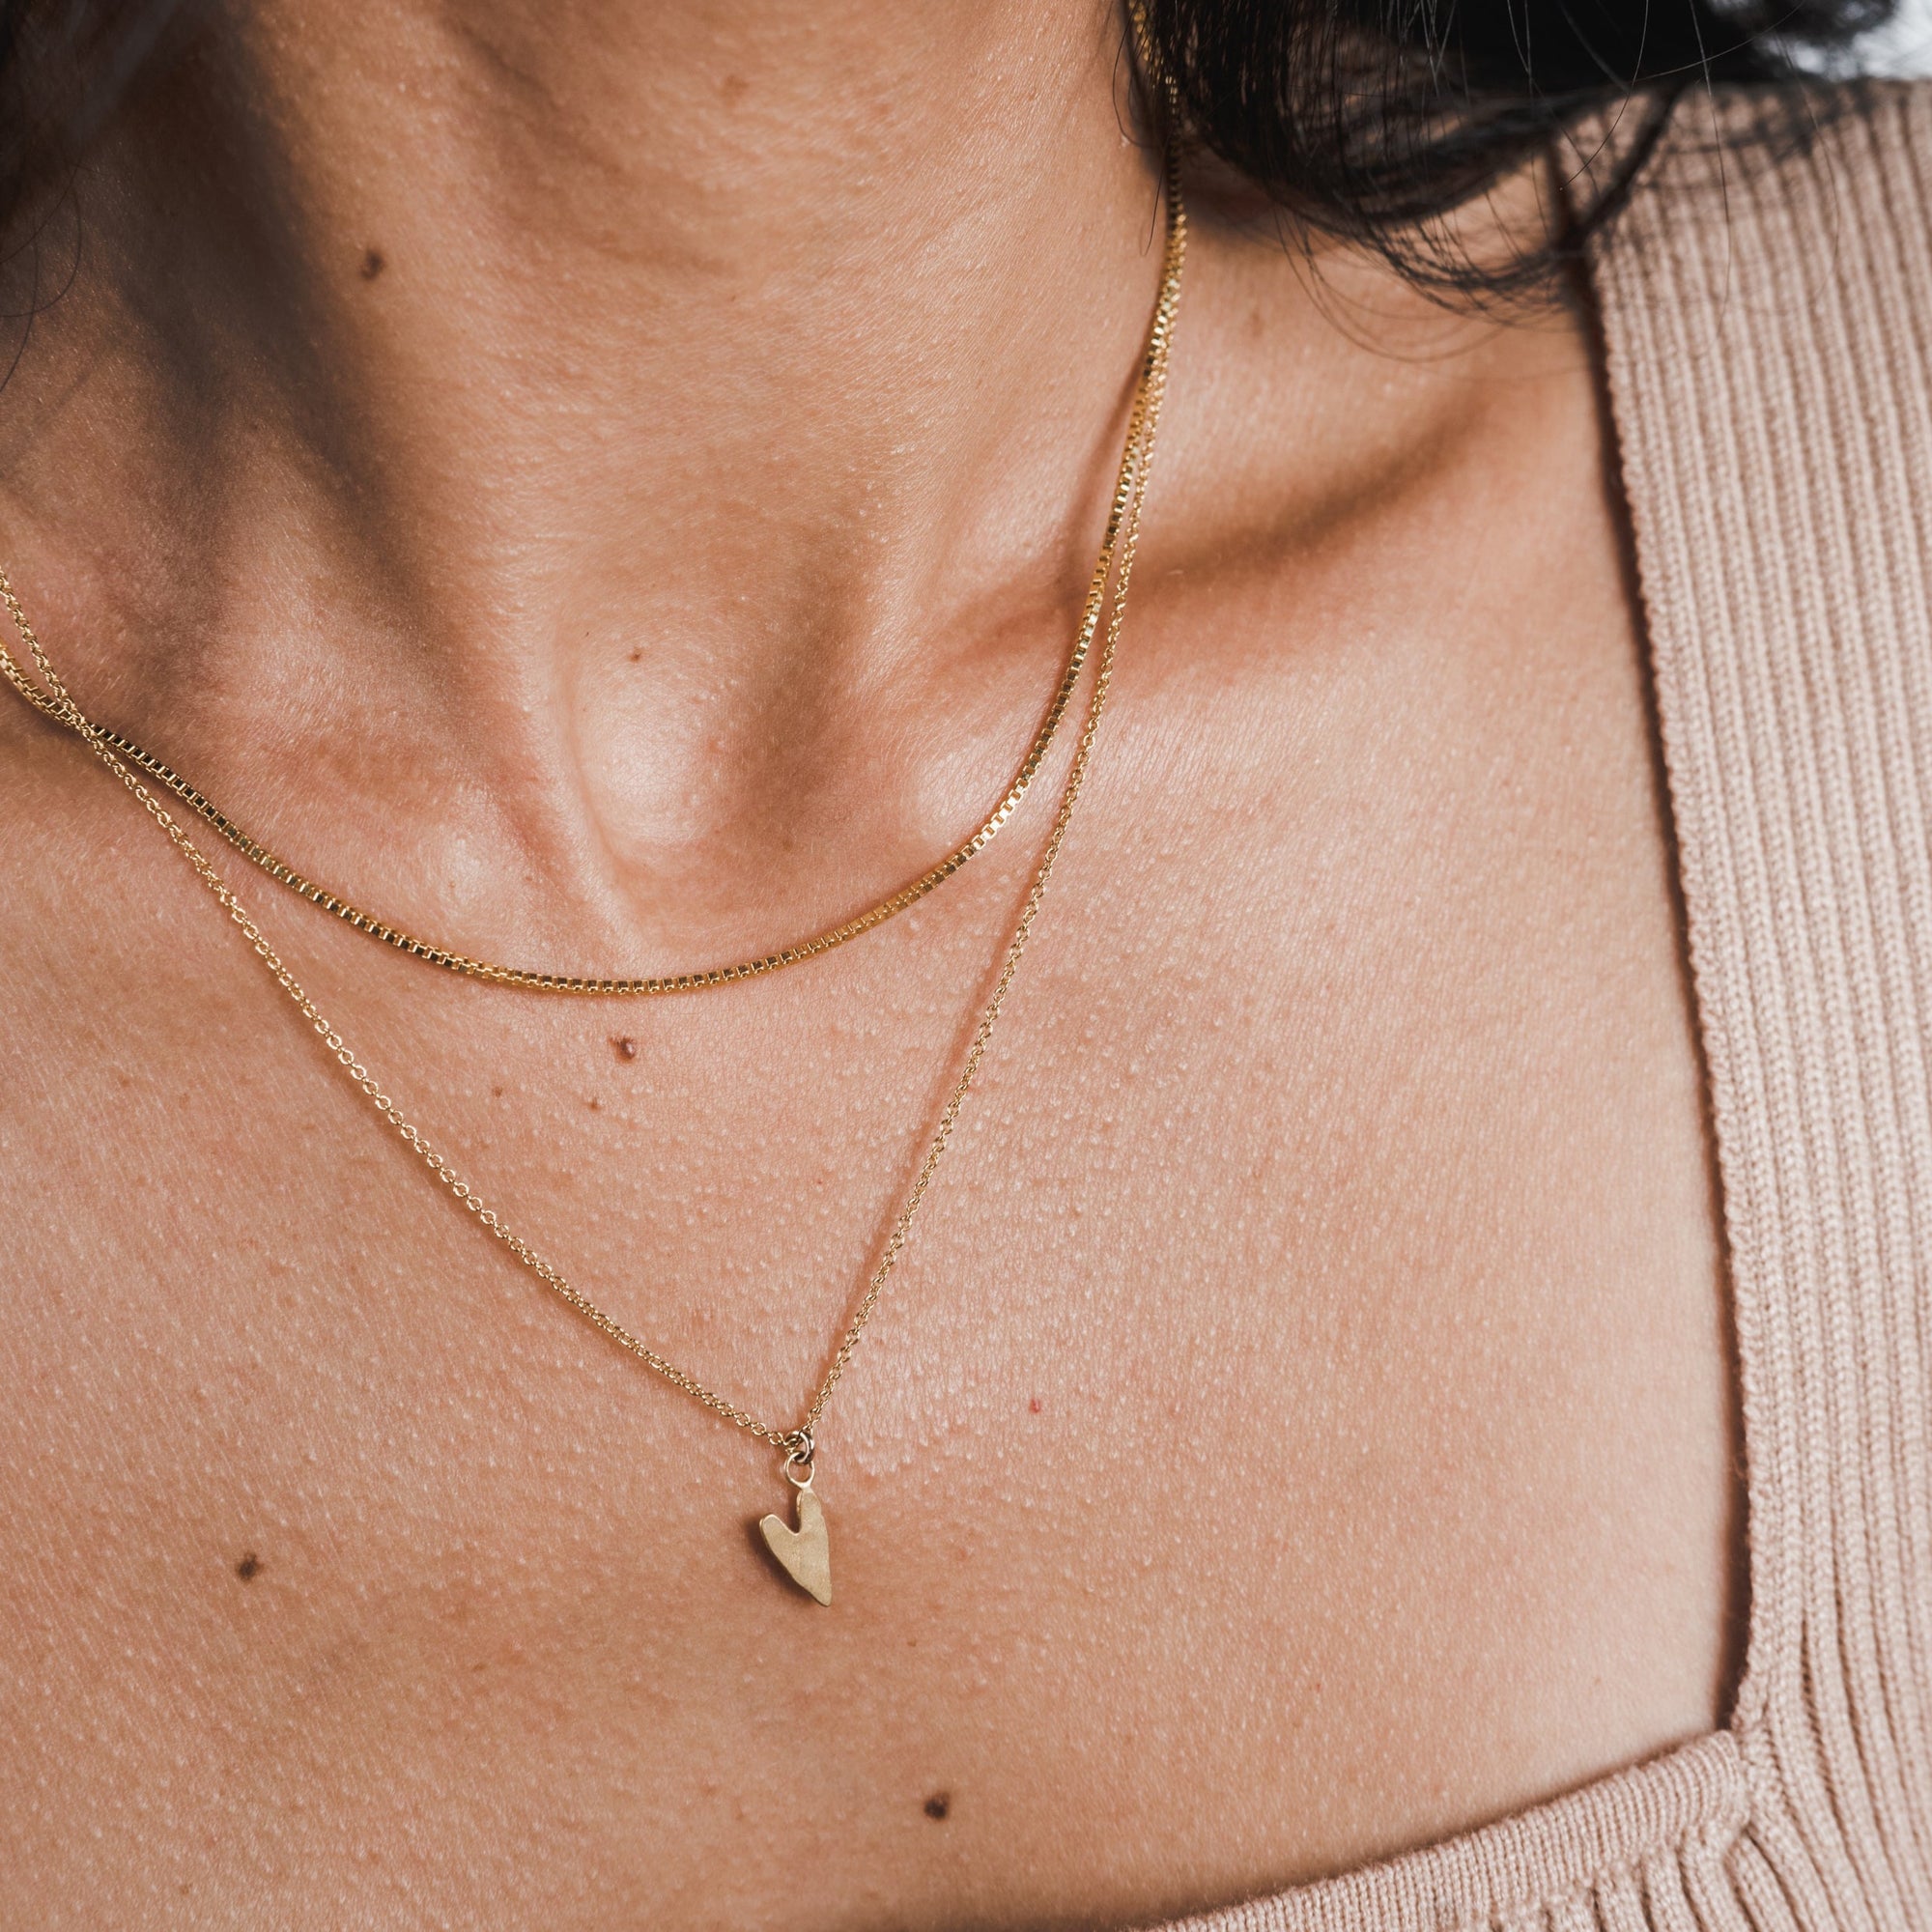 A close-up of a woman&#39;s neck showing a delicate Love Deeply Necklace with a small Helen Keller charm by Becoming Jewelry.